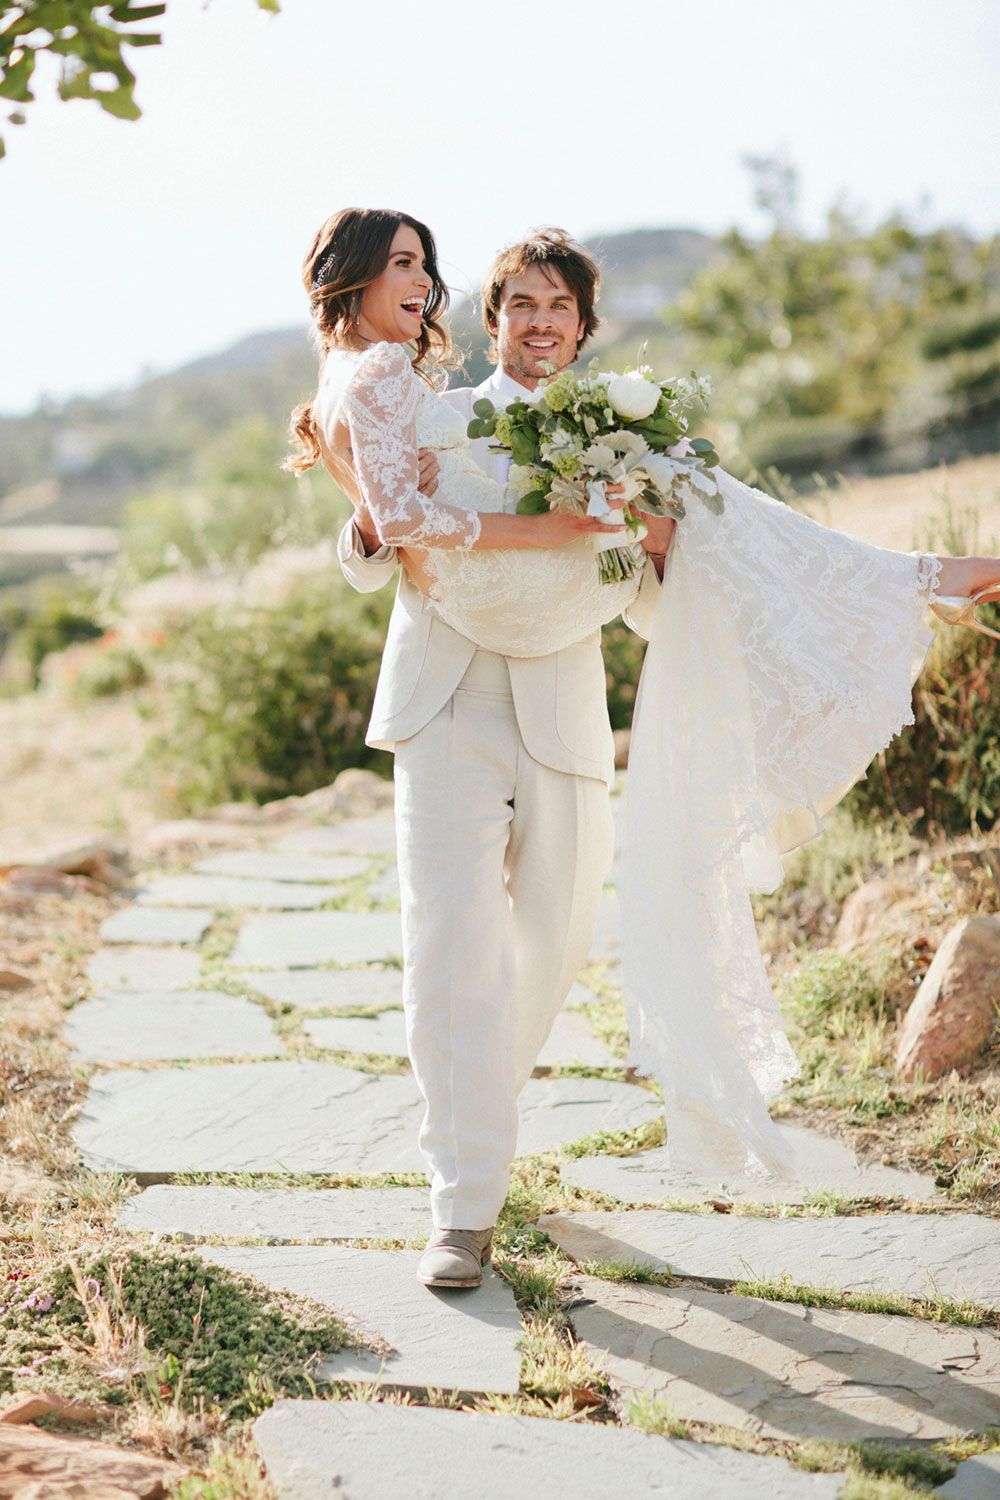 The Most Beautiful Celebrity Wedding Dresses of All Time